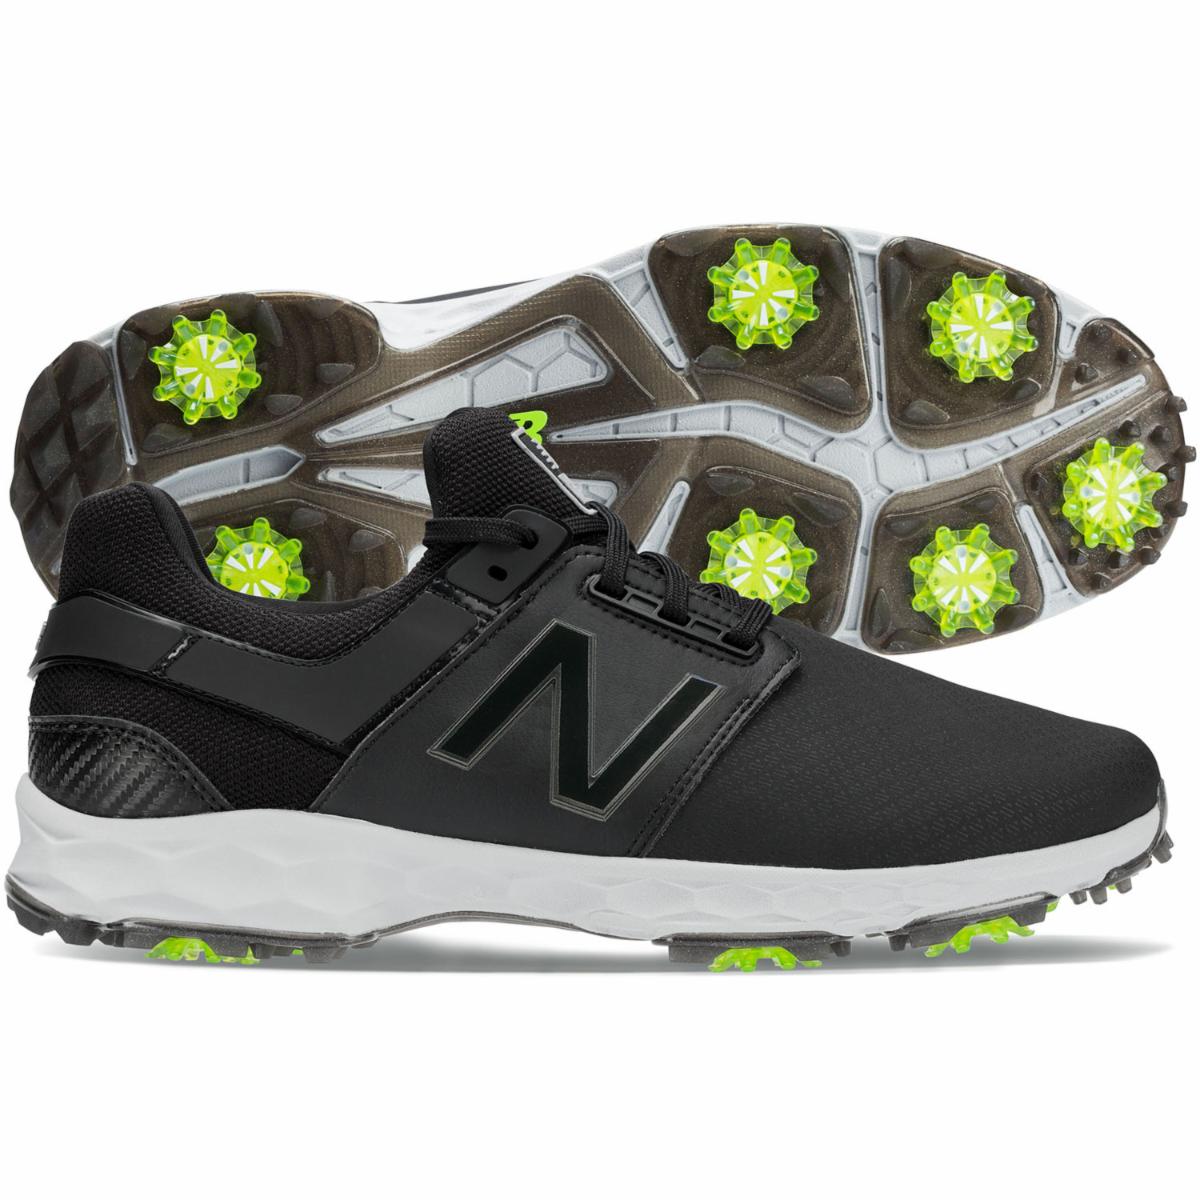 The #1 Writer in Golf: New Balance Fresh Foam Golf Shoes Preview ...